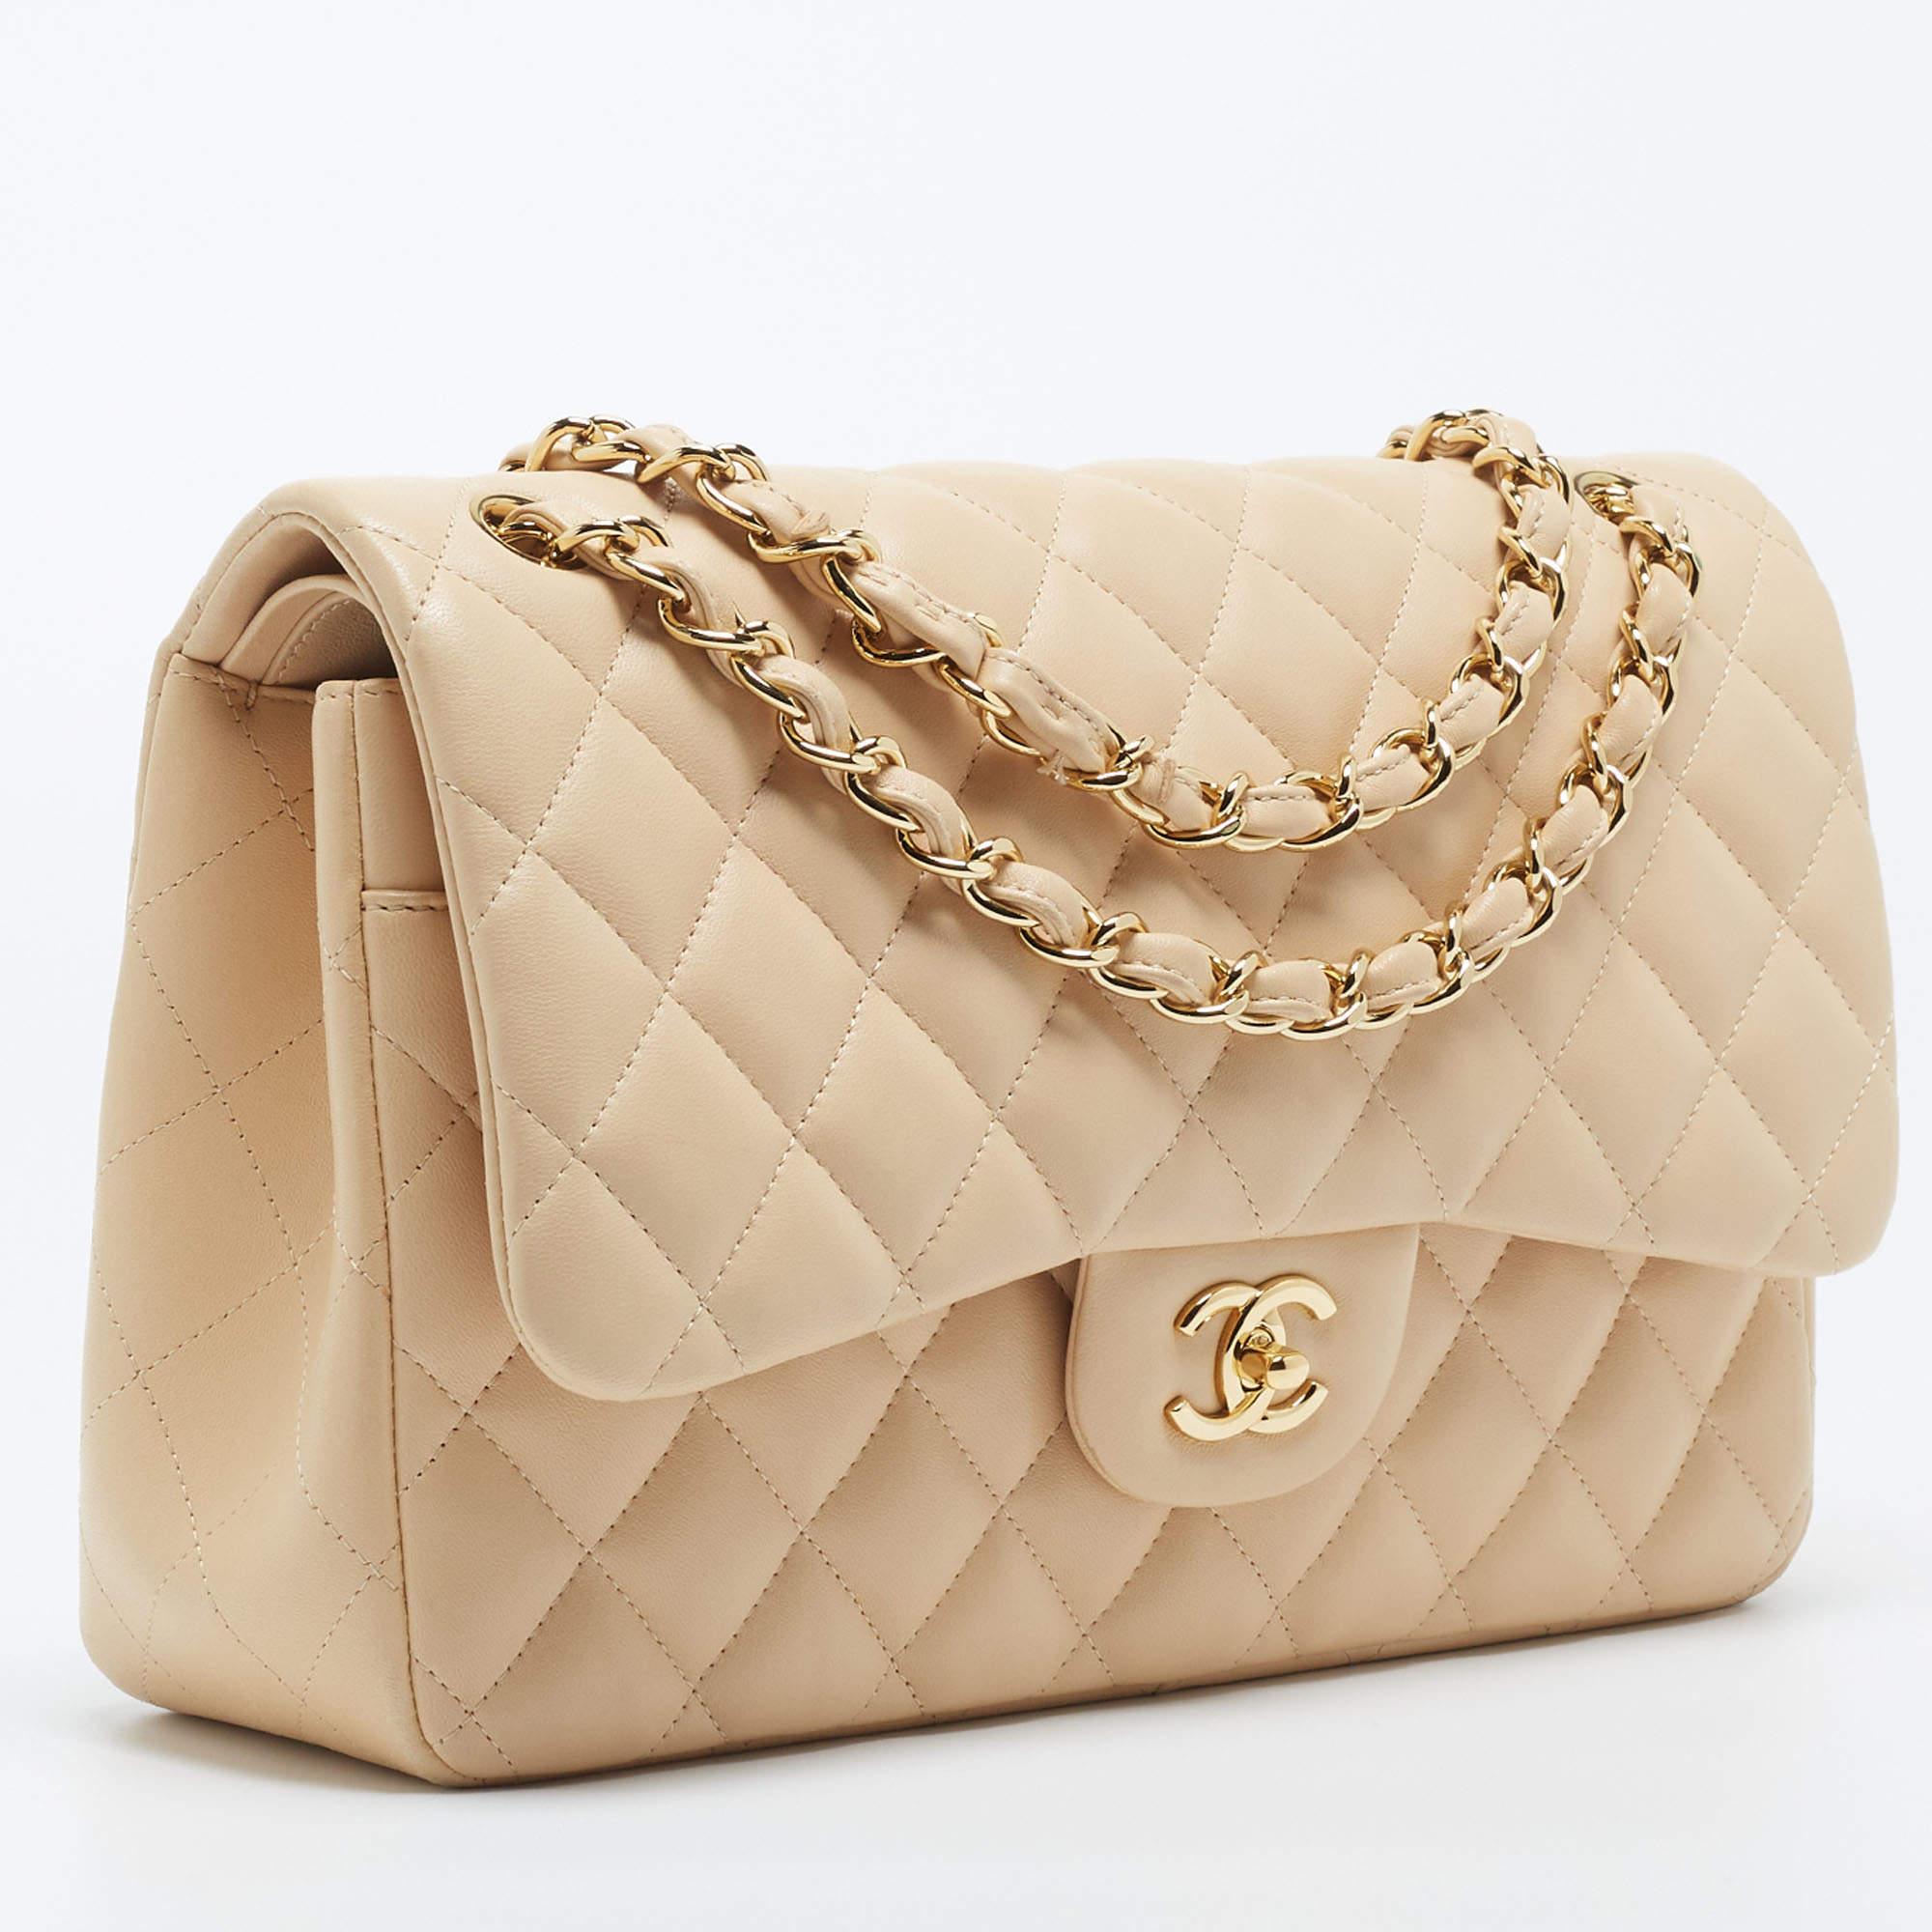 Women's Chanel Beige Quilted Leather Jumbo Classic Double Flap Bag